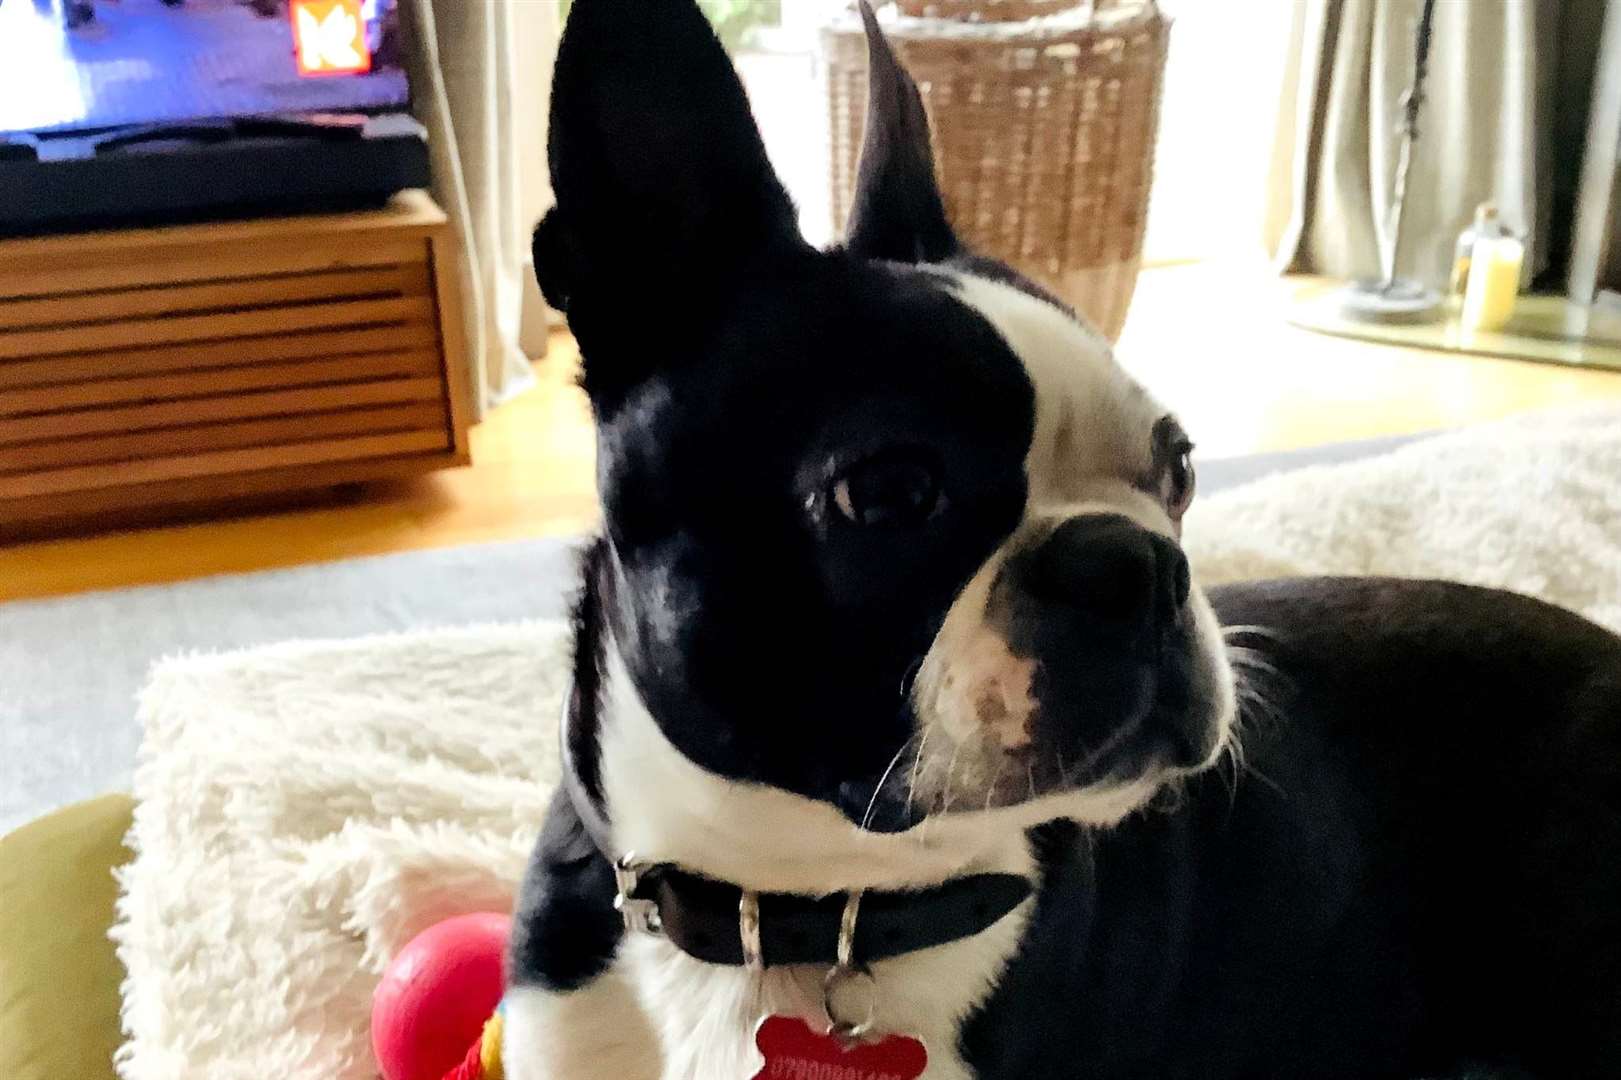 Patti is a three-year-old Boston terrier